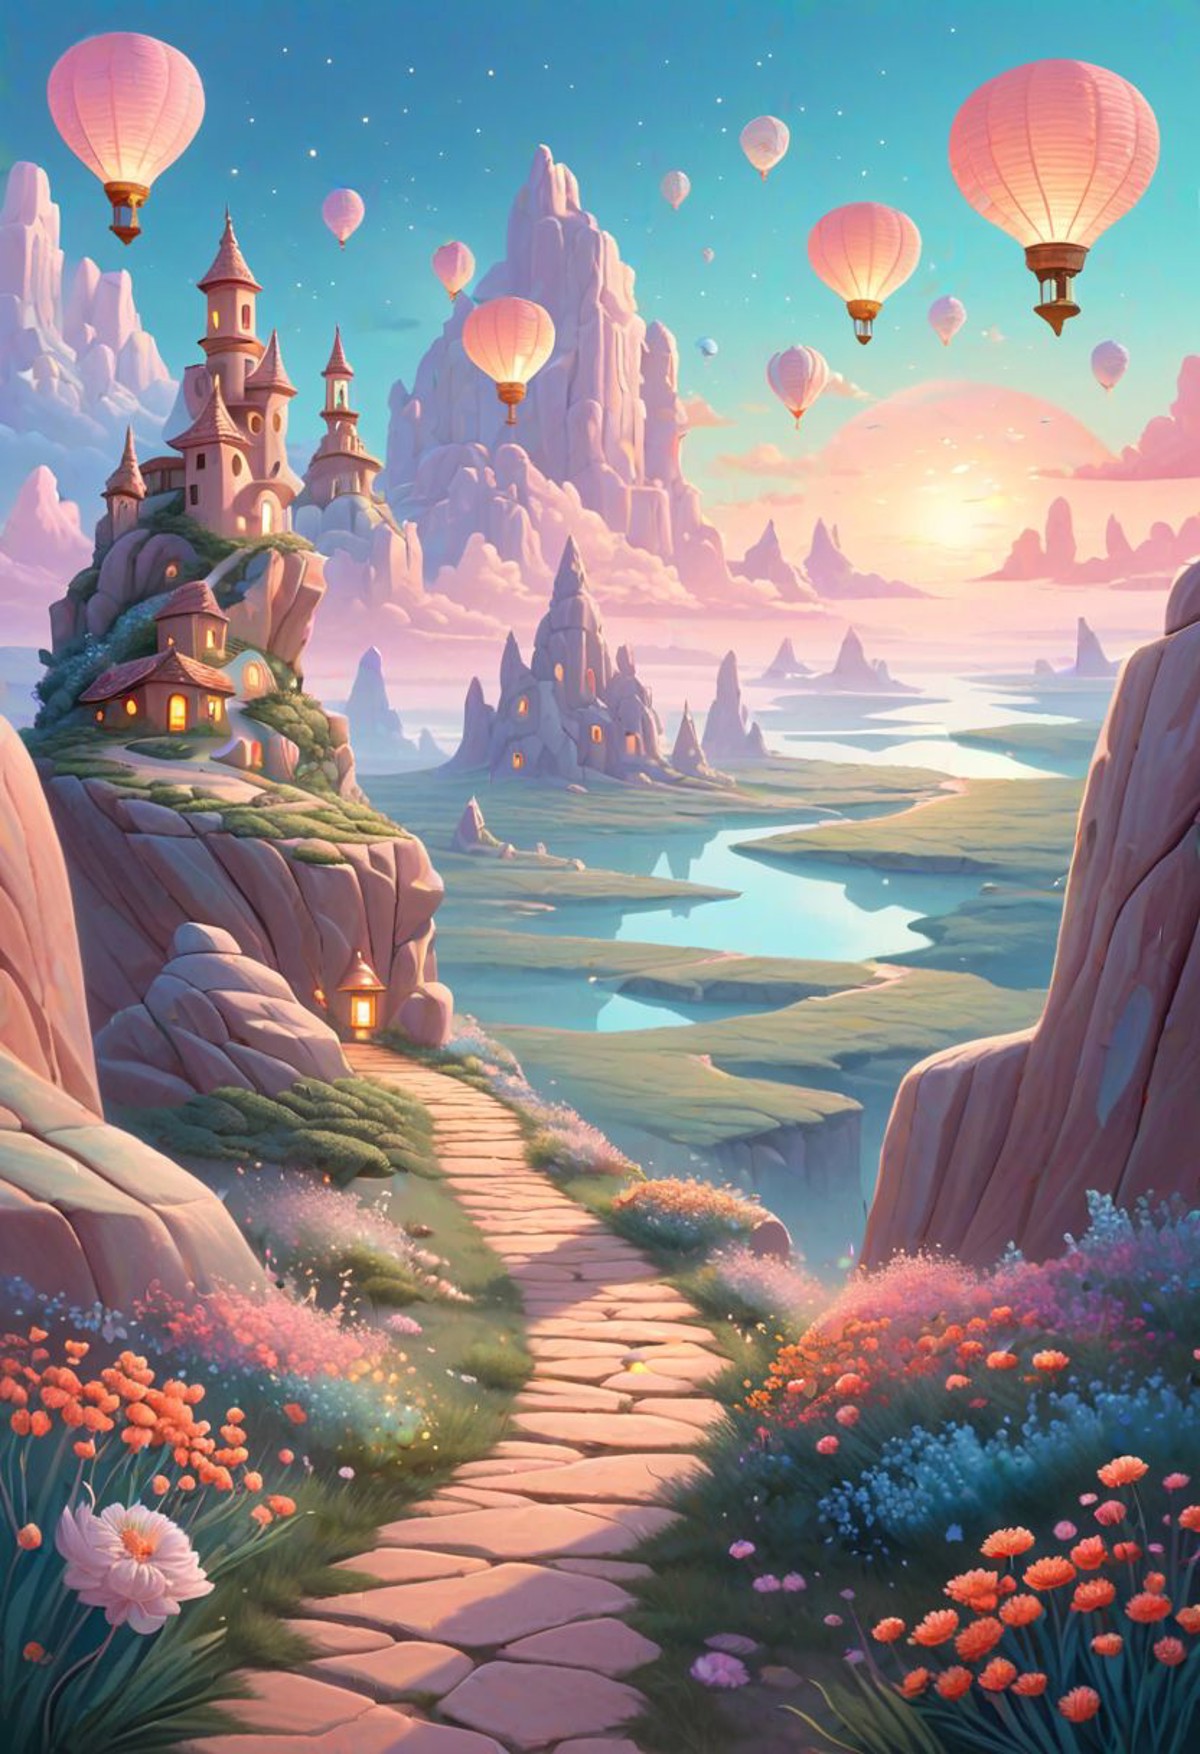 a whimsical journey, path meandering into an undefined horizon, surrounded by a surreal landscape, peculiar flora and faun...